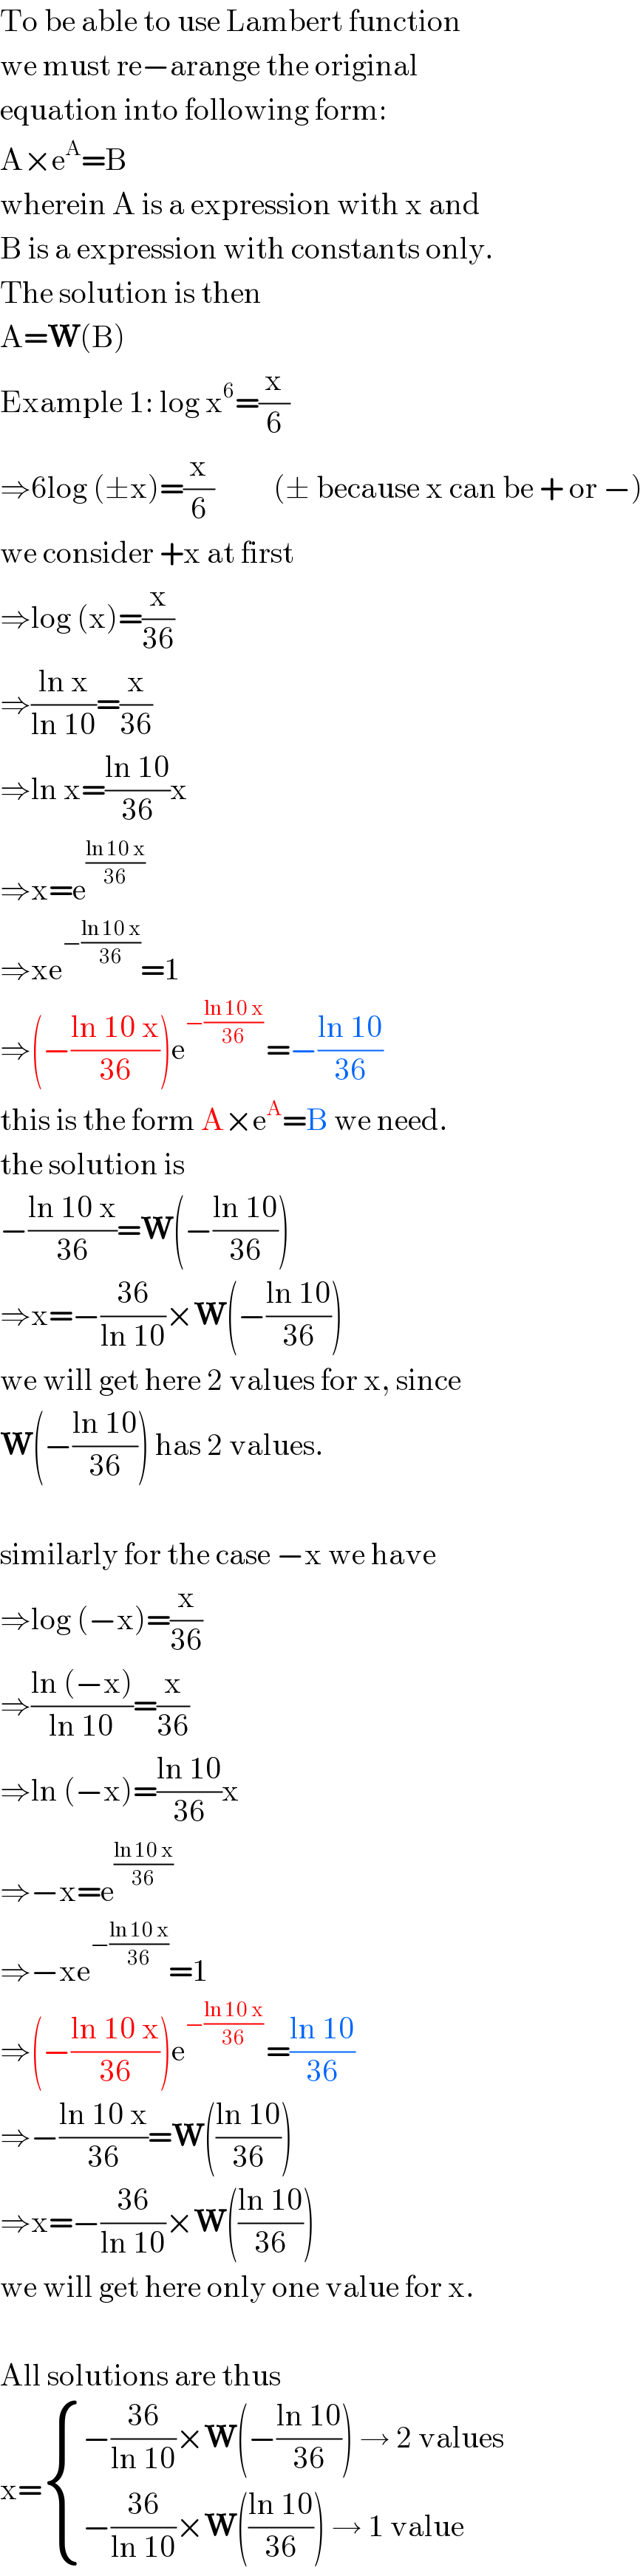 To be able to use Lambert function  we must re−arange the original  equation into following form:  A×e^A =B  wherein A is a expression with x and  B is a expression with constants only.  The solution is then  A=W(B)  Example 1: log x^6 =(x/6)  ⇒6log (±x)=(x/6)          (± because x can be + or −)  we consider +x at first  ⇒log (x)=(x/(36))  ⇒((ln x)/(ln 10))=(x/(36))  ⇒ln x=((ln 10)/(36))x  ⇒x=e^((ln 10 x)/(36))   ⇒xe^(−((ln 10 x)/(36))) =1  ⇒(−((ln 10 x)/(36)))e^(−((ln 10 x)/(36)) ) =−((ln 10)/(36))  this is the form A×e^A =B we need.  the solution is  −((ln 10 x)/(36))=W(−((ln 10)/(36)))  ⇒x=−((36)/(ln 10))×W(−((ln 10)/(36)))  we will get here 2 values for x, since  W(−((ln 10)/(36))) has 2 values.    similarly for the case −x we have  ⇒log (−x)=(x/(36))  ⇒((ln (−x))/(ln 10))=(x/(36))  ⇒ln (−x)=((ln 10)/(36))x  ⇒−x=e^((ln 10 x)/(36))   ⇒−xe^(−((ln 10 x)/(36))) =1  ⇒(−((ln 10 x)/(36)))e^(−((ln 10 x)/(36)) ) =((ln 10)/(36))  ⇒−((ln 10 x)/(36))=W(((ln 10)/(36)))  ⇒x=−((36)/(ln 10))×W(((ln 10)/(36)))  we will get here only one value for x.    All solutions are thus  x= { ((−((36)/(ln 10))×W(−((ln 10)/(36))) → 2 values)),((−((36)/(ln 10))×W(((ln 10)/(36))) → 1 value)) :}  